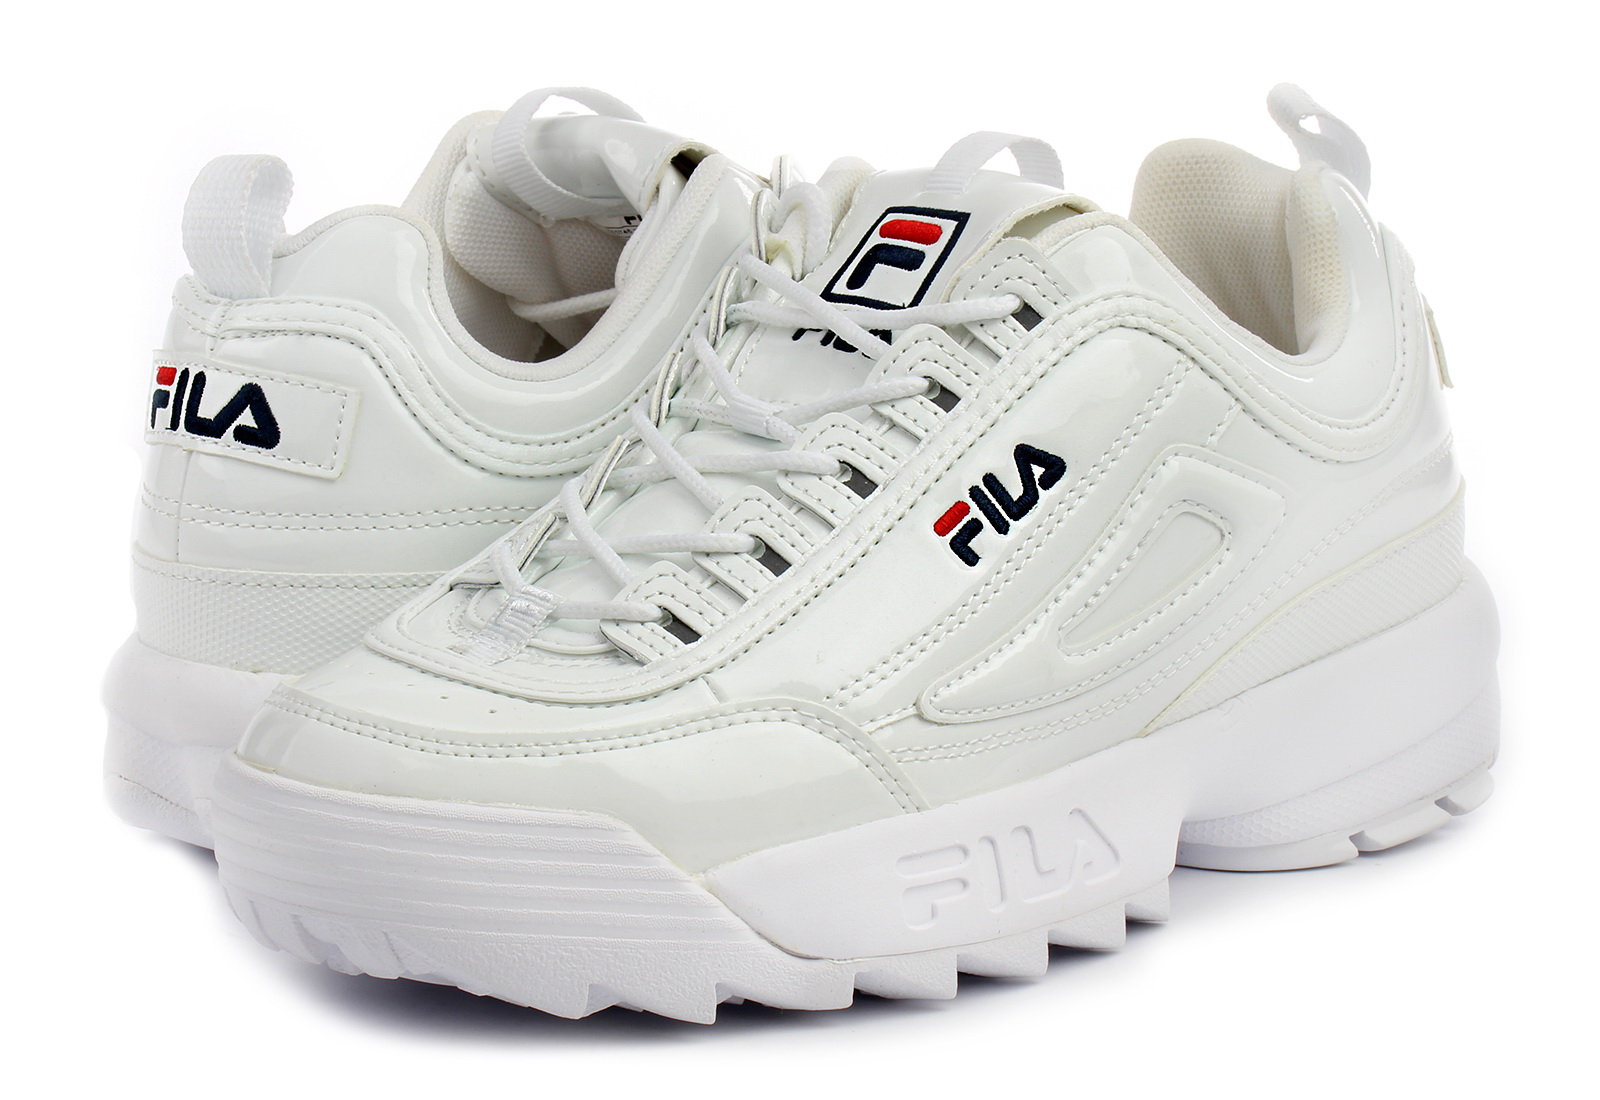 kompas Zachtmoedigheid Tirannie Fila Sneakers - Disruptor P Low - 1010746-1FG - Online shop for sneakers,  shoes and boots